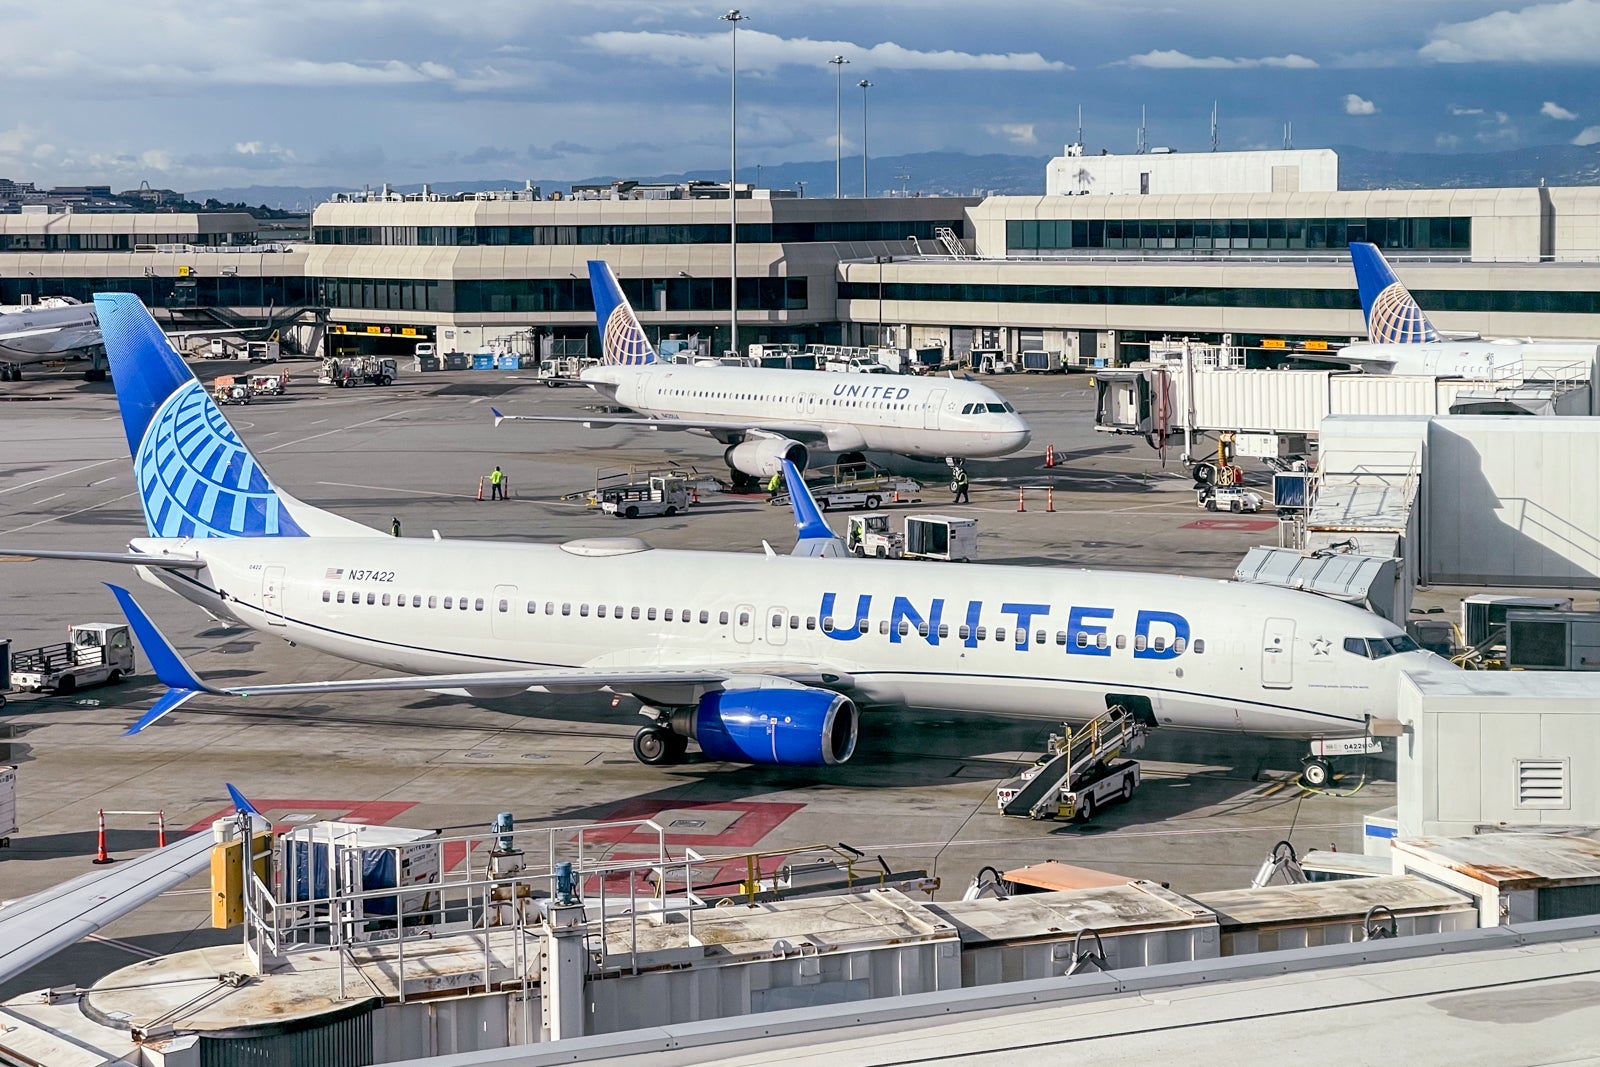 United Airlines planes parked at SFO